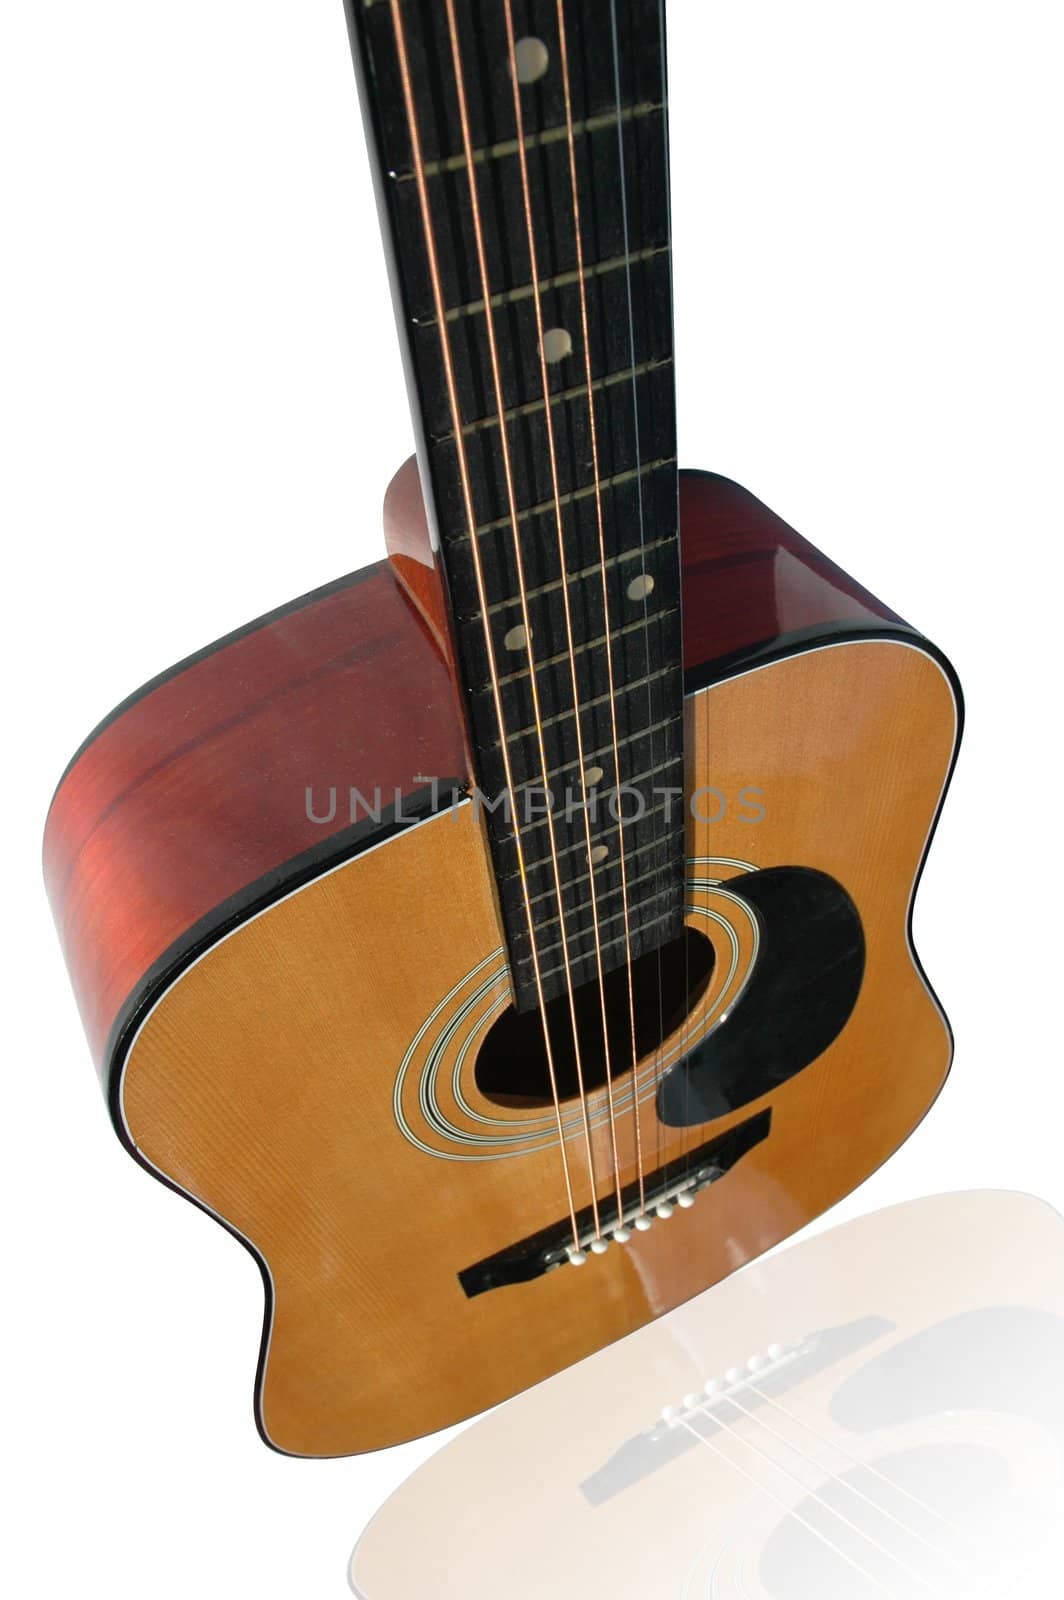 Guitar view from top on white background with clipping path